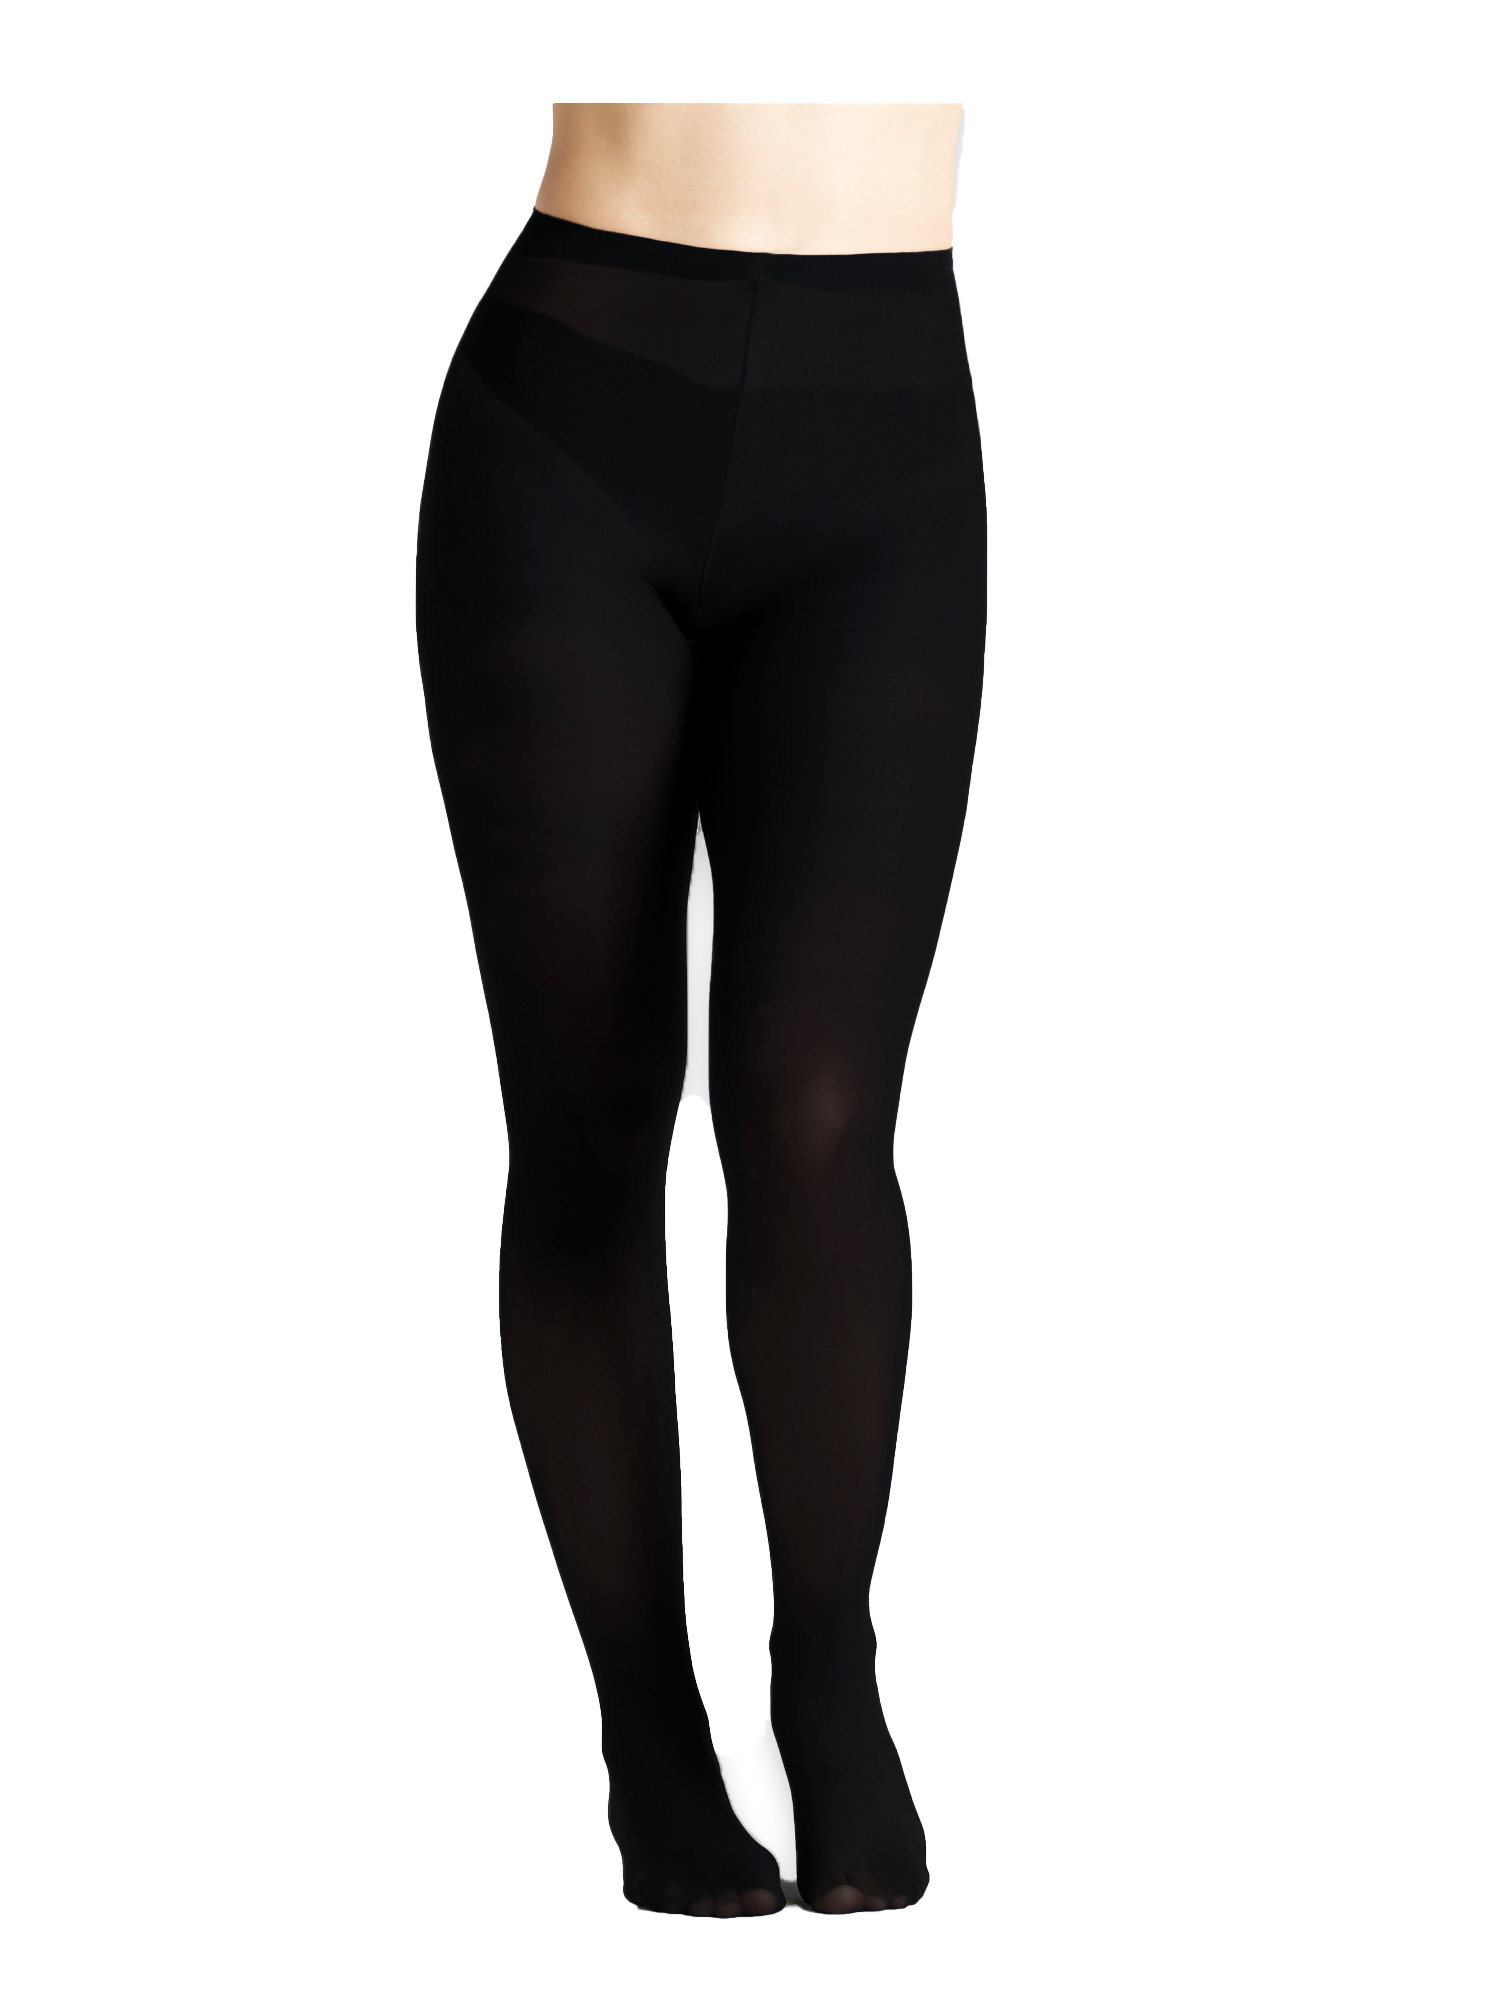 Black tights for women